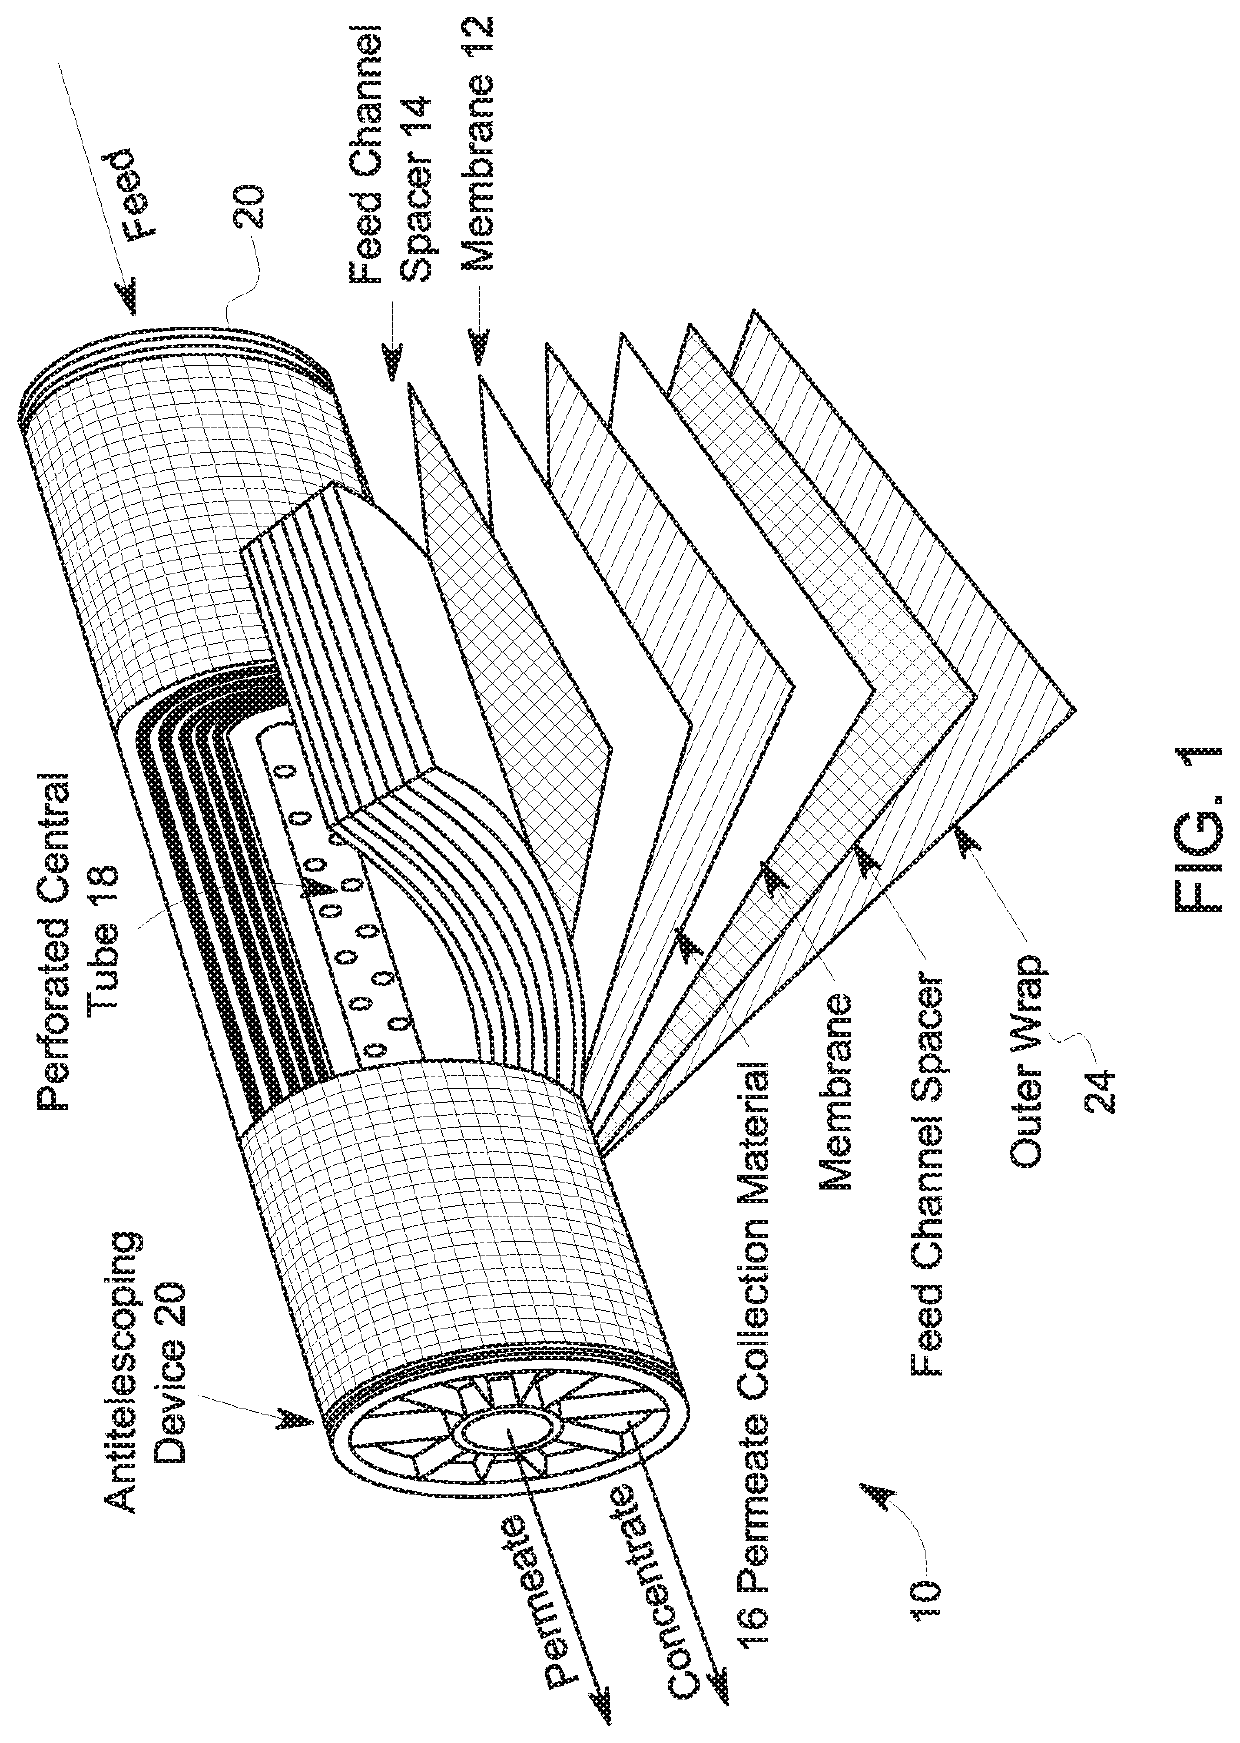 Spiral wound membrane element for high temperature filtration